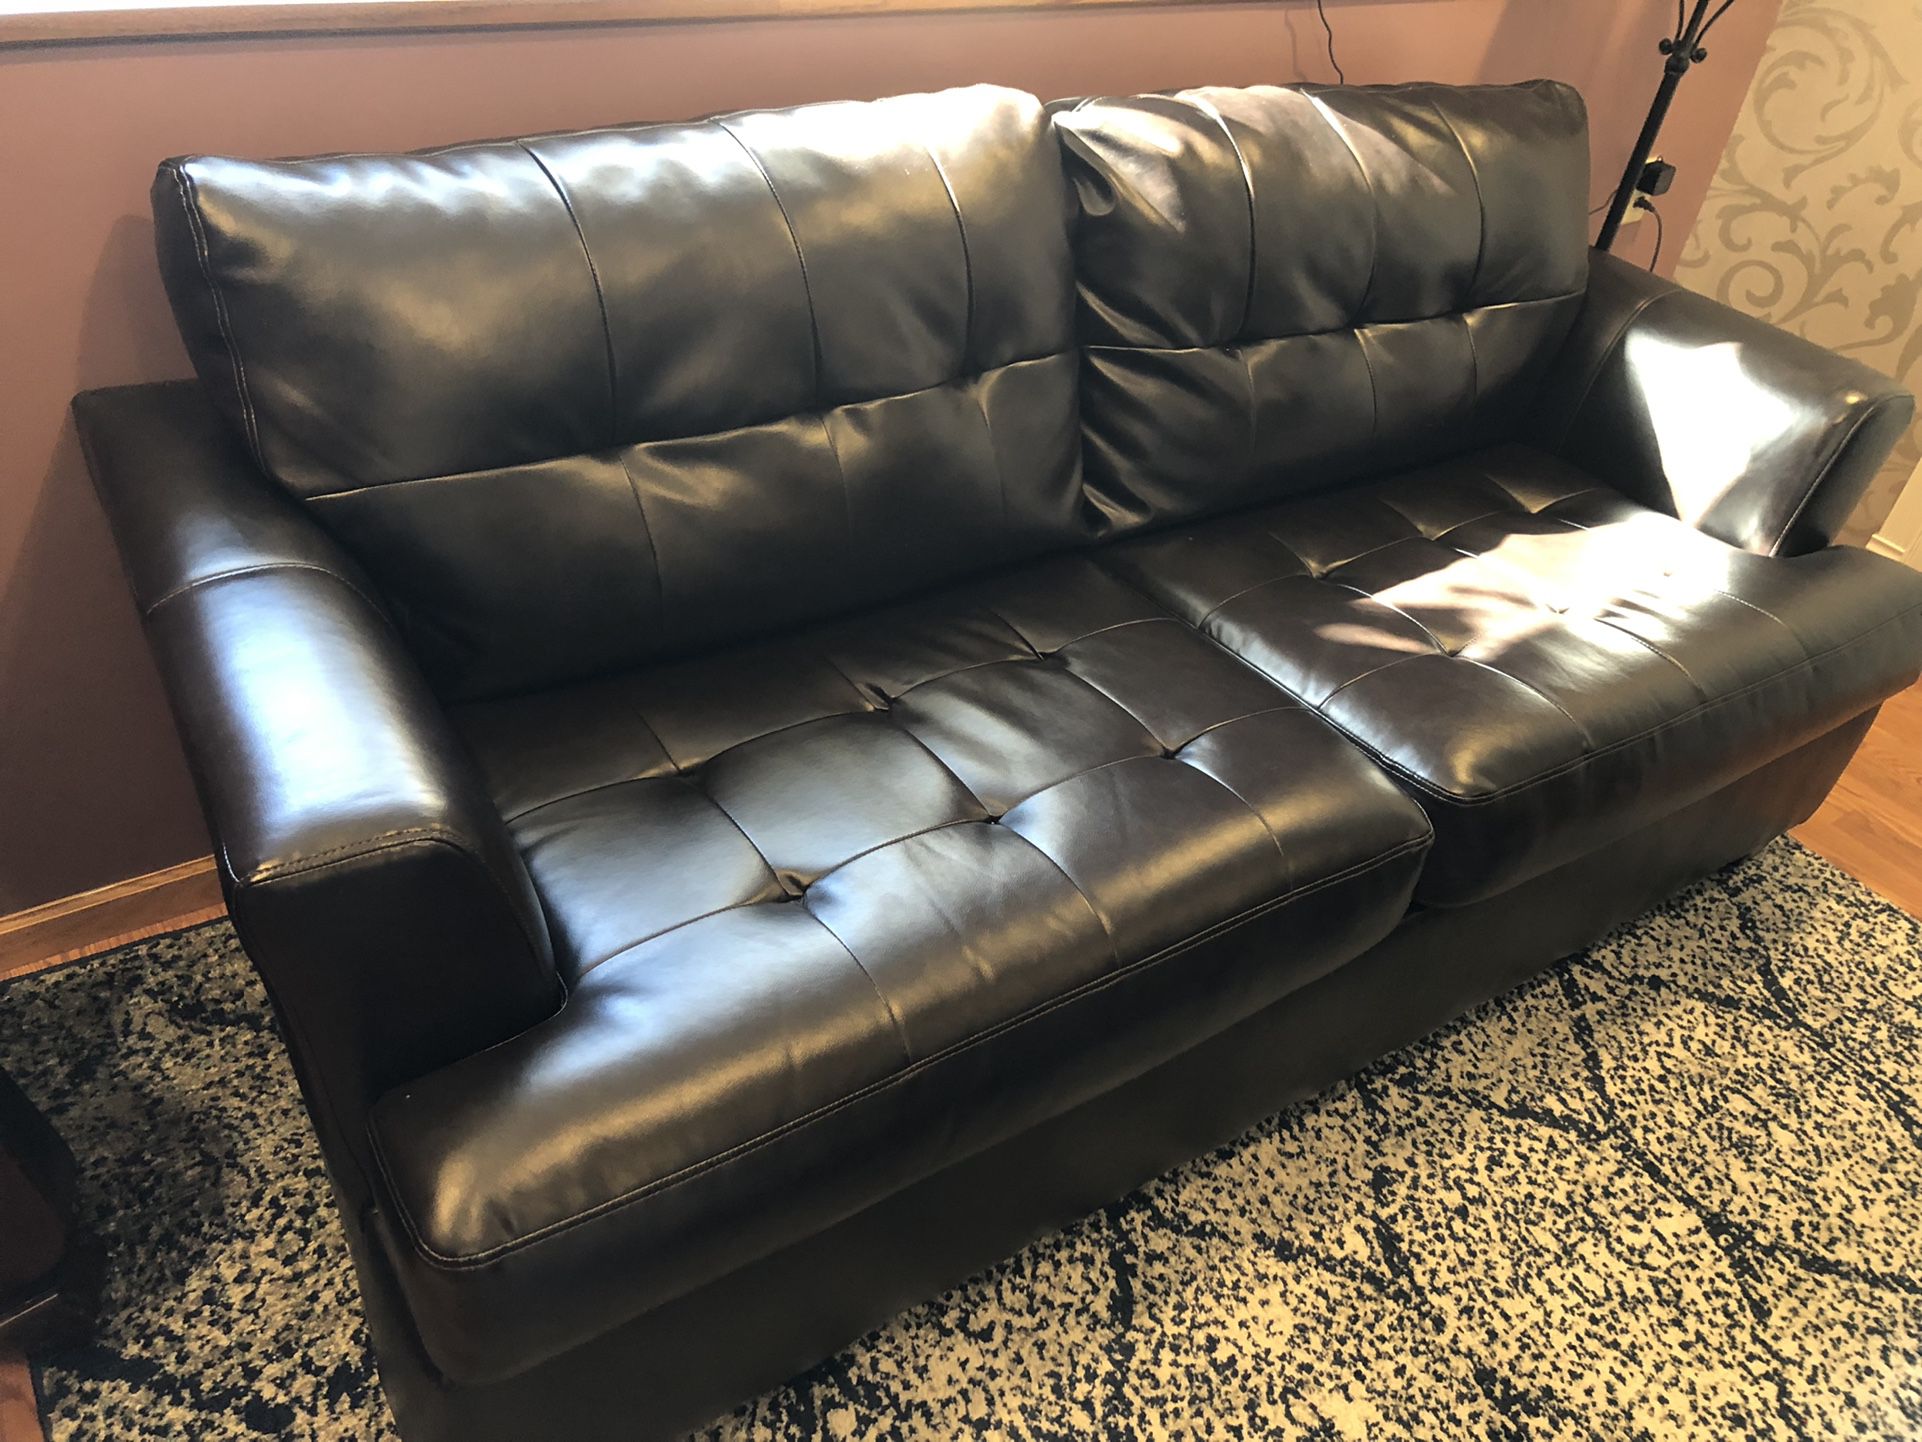 Leather couch, chair, and ottoman